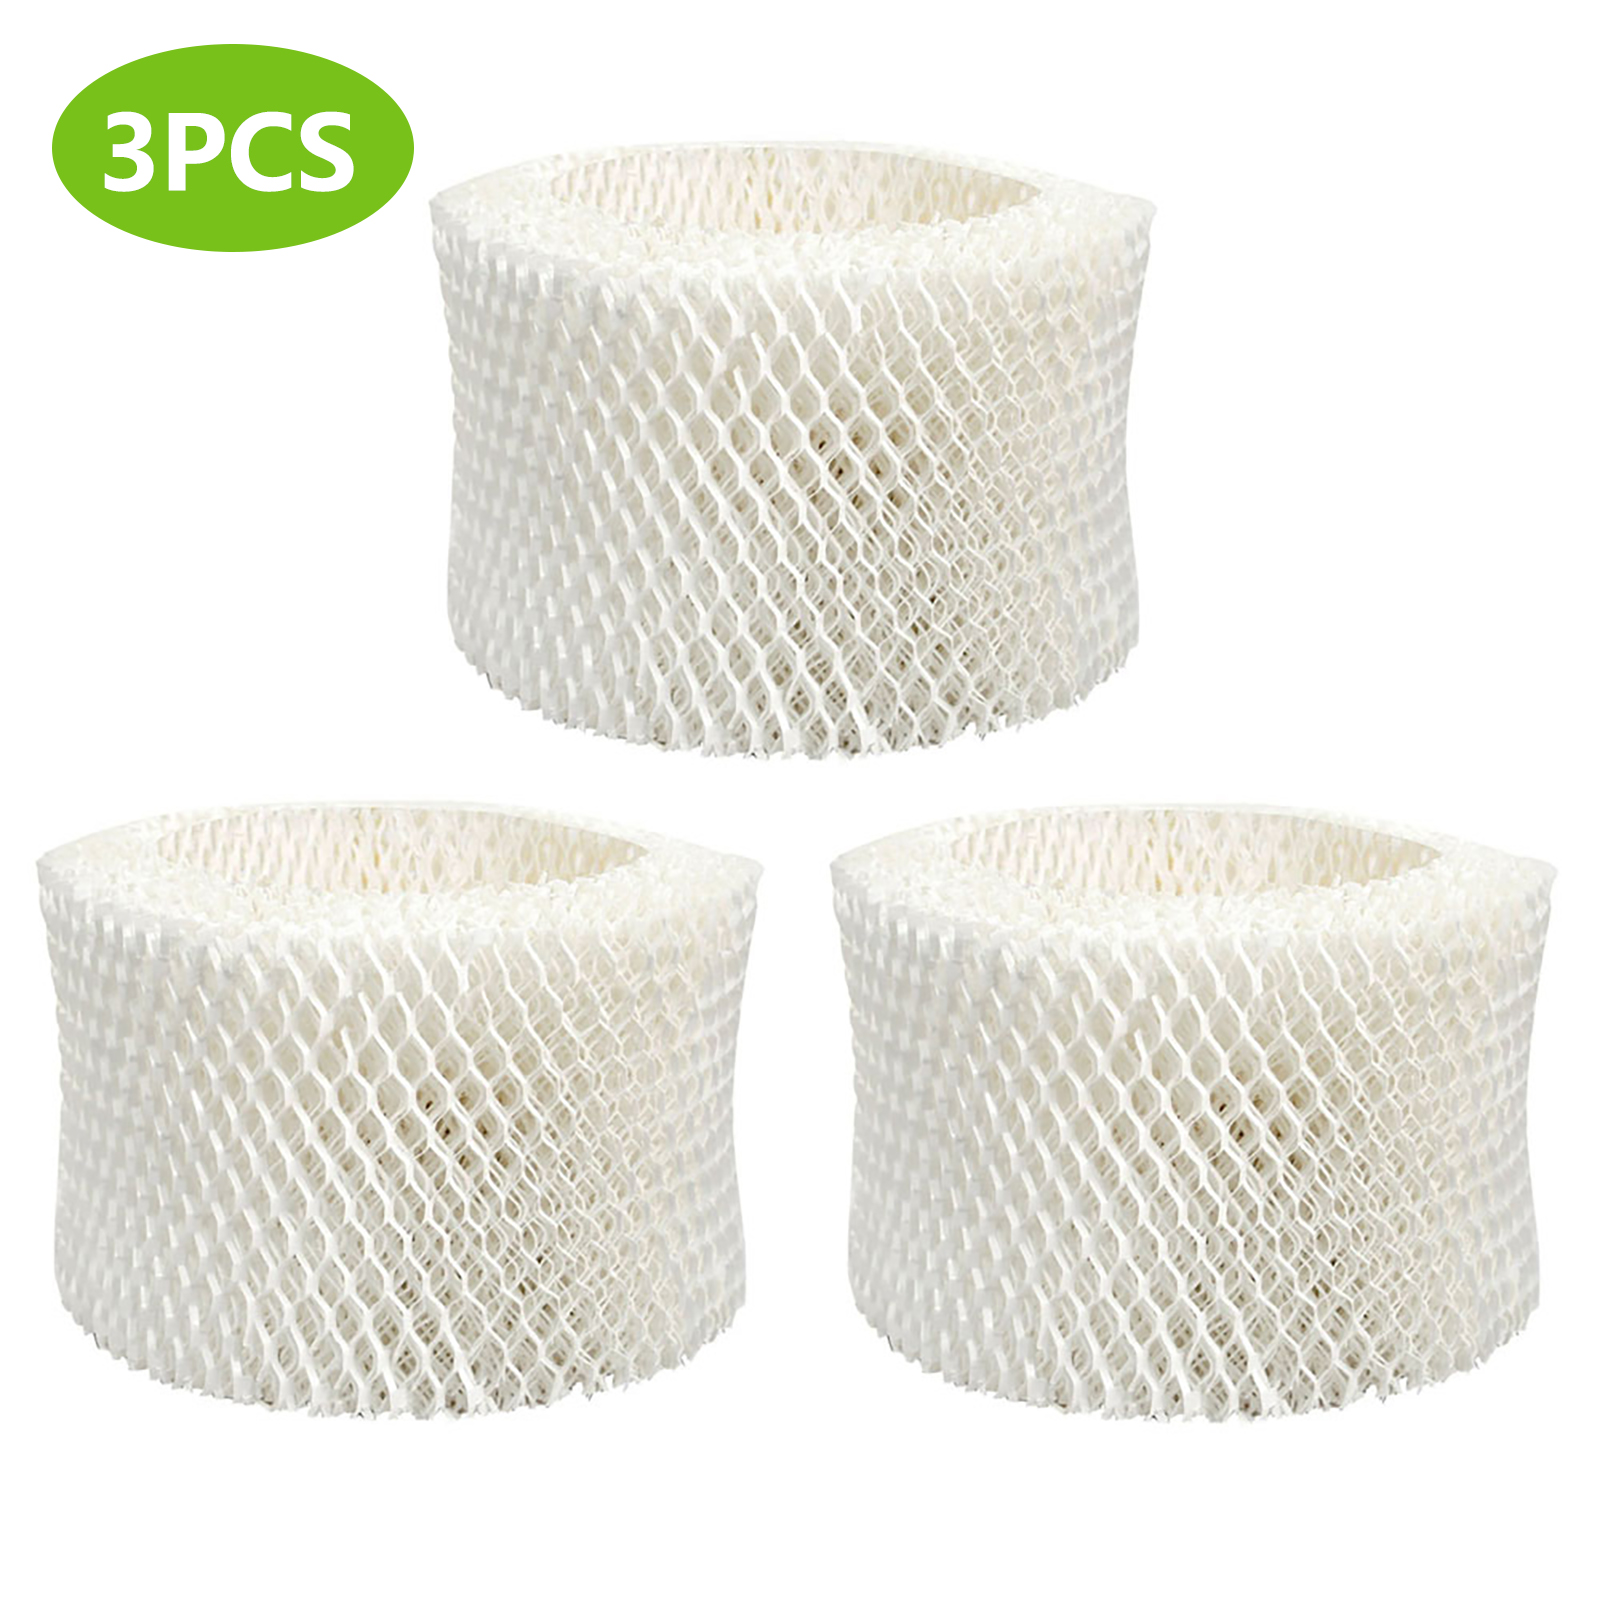 Replacement Humidifier Filter Wick for Honeywell HAC-500 HCM-350 HCM-600 HCM-630